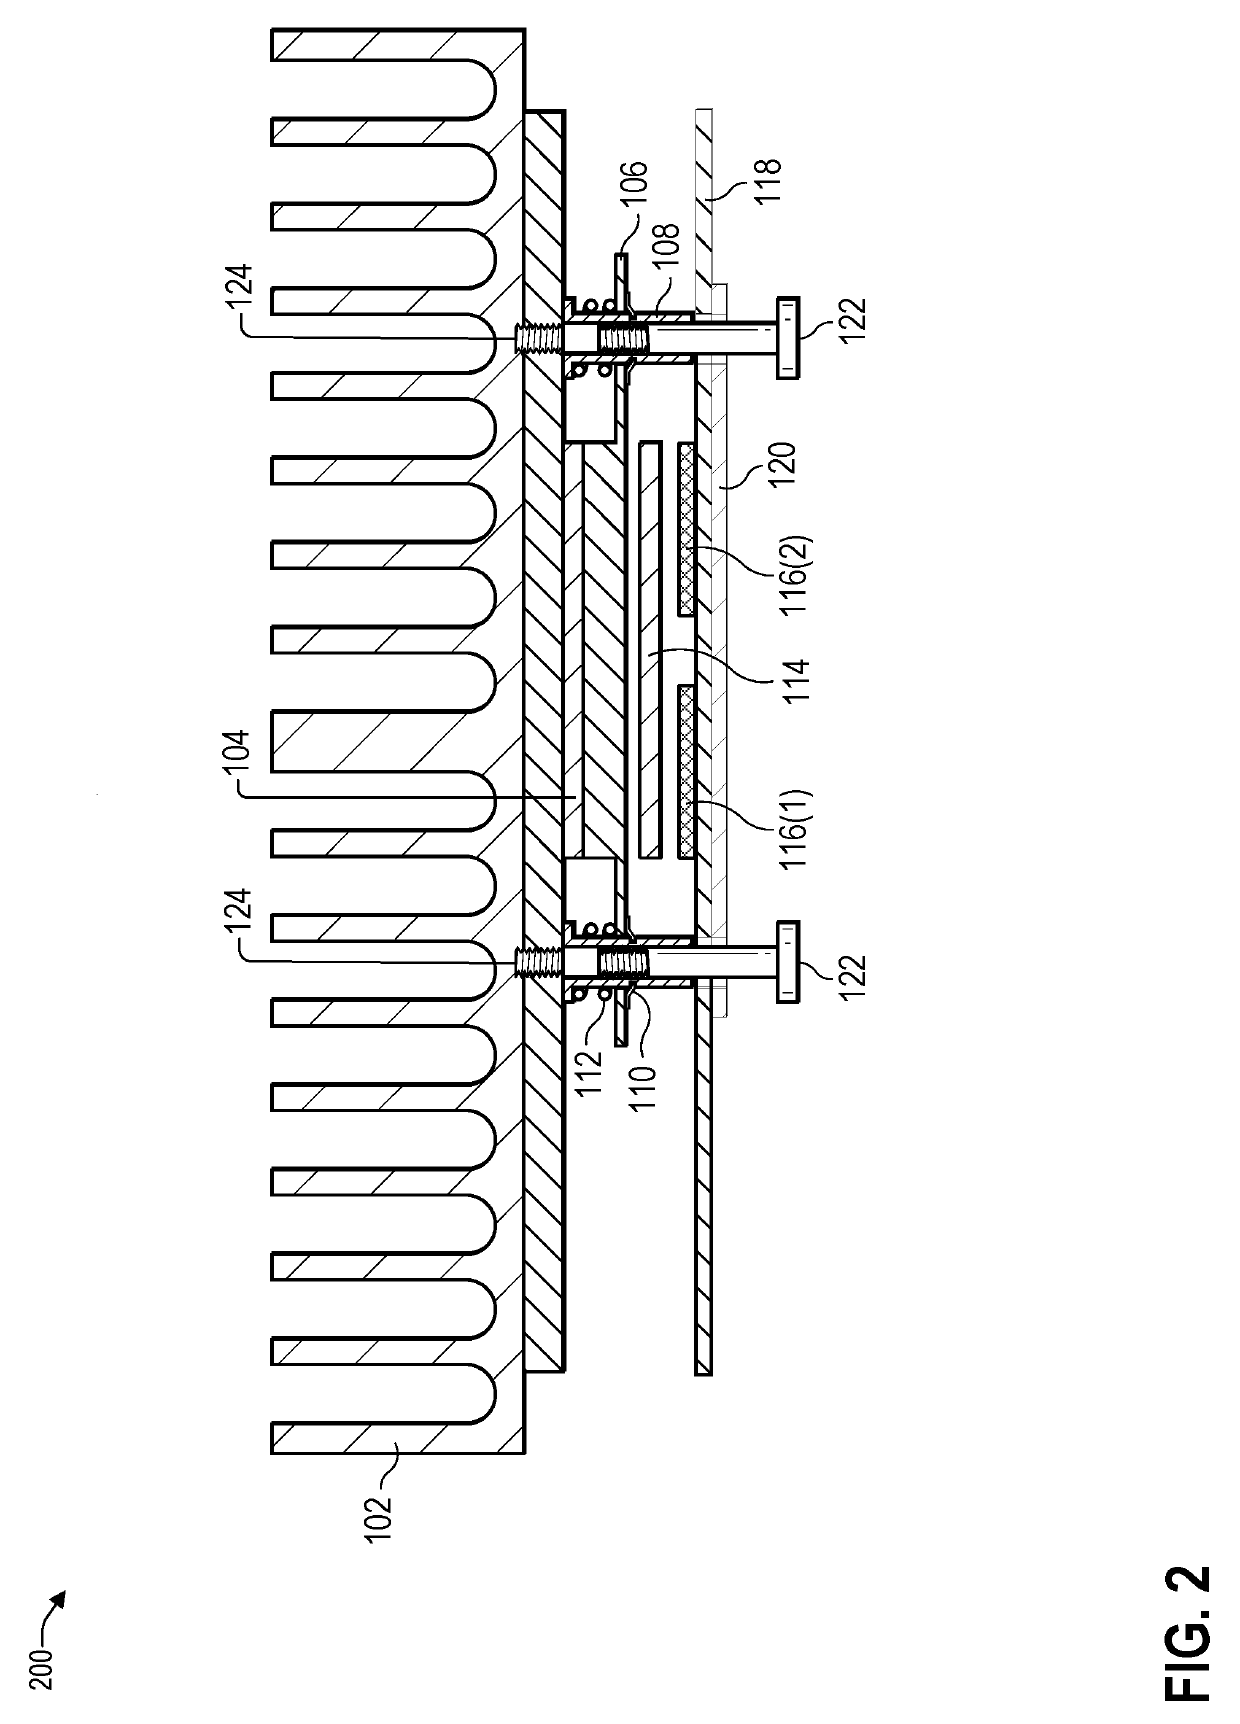 Heatsink mounting system to maintain a relatively uniform amount of pressure on components of a circuit board